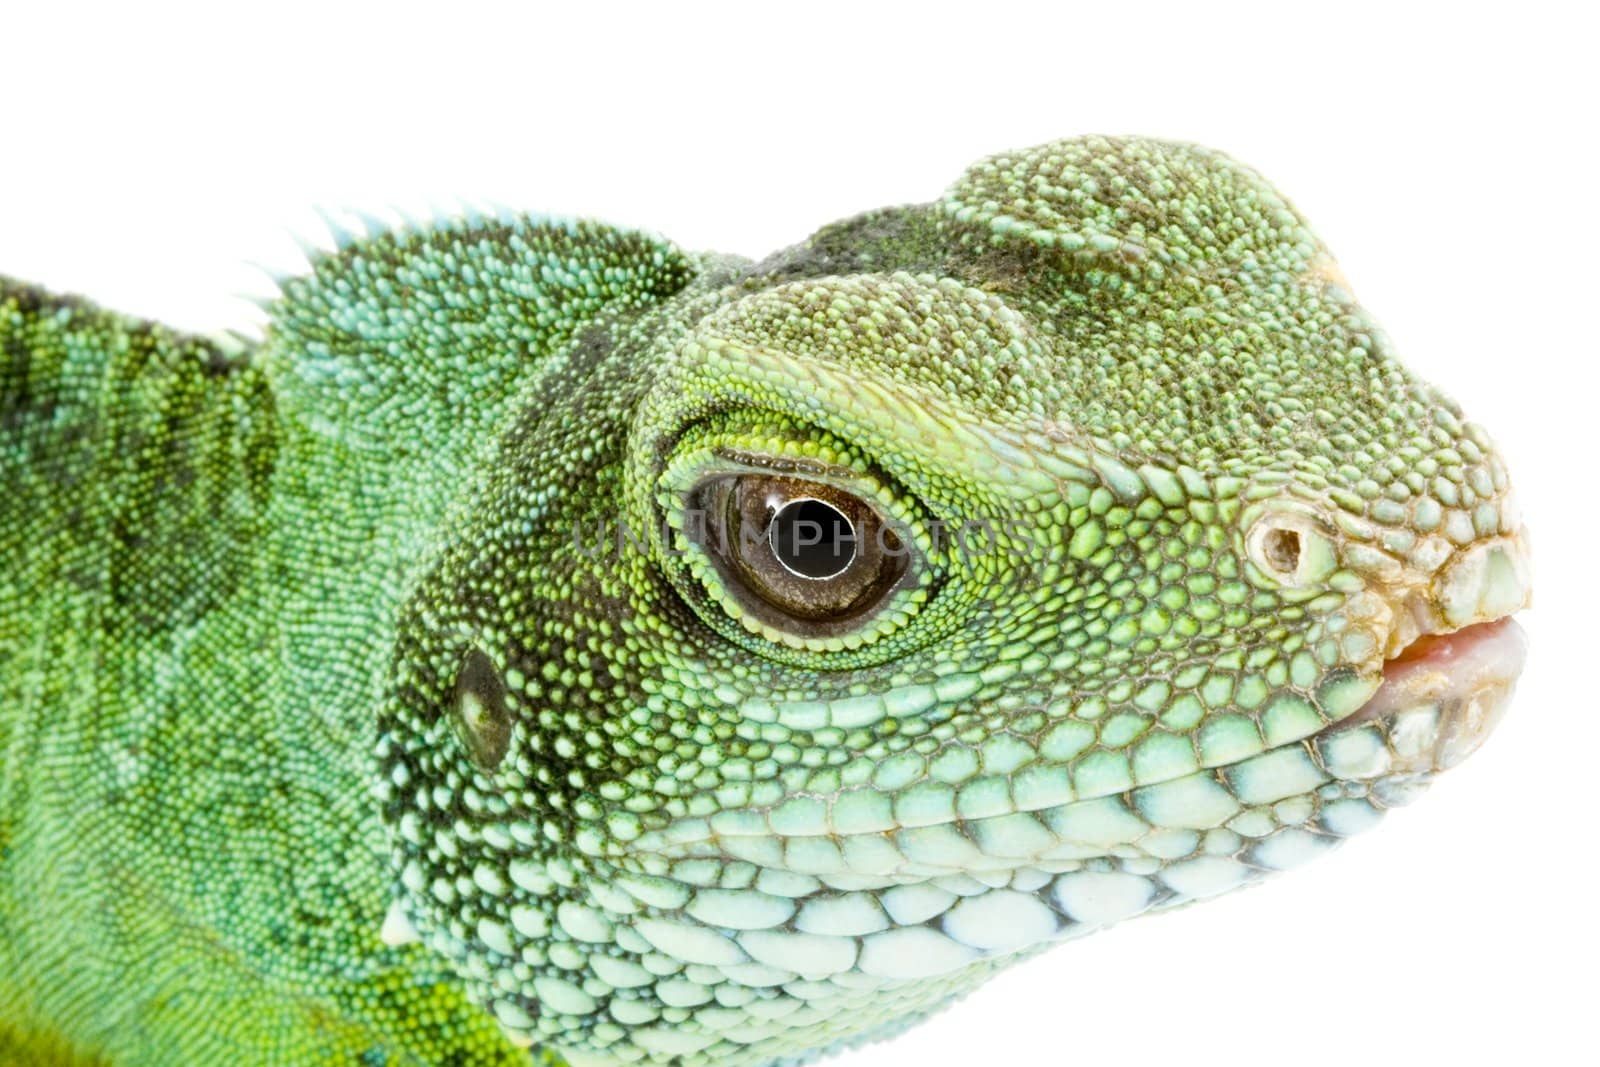 face and head of an adult agama Physignathus cocincinus 